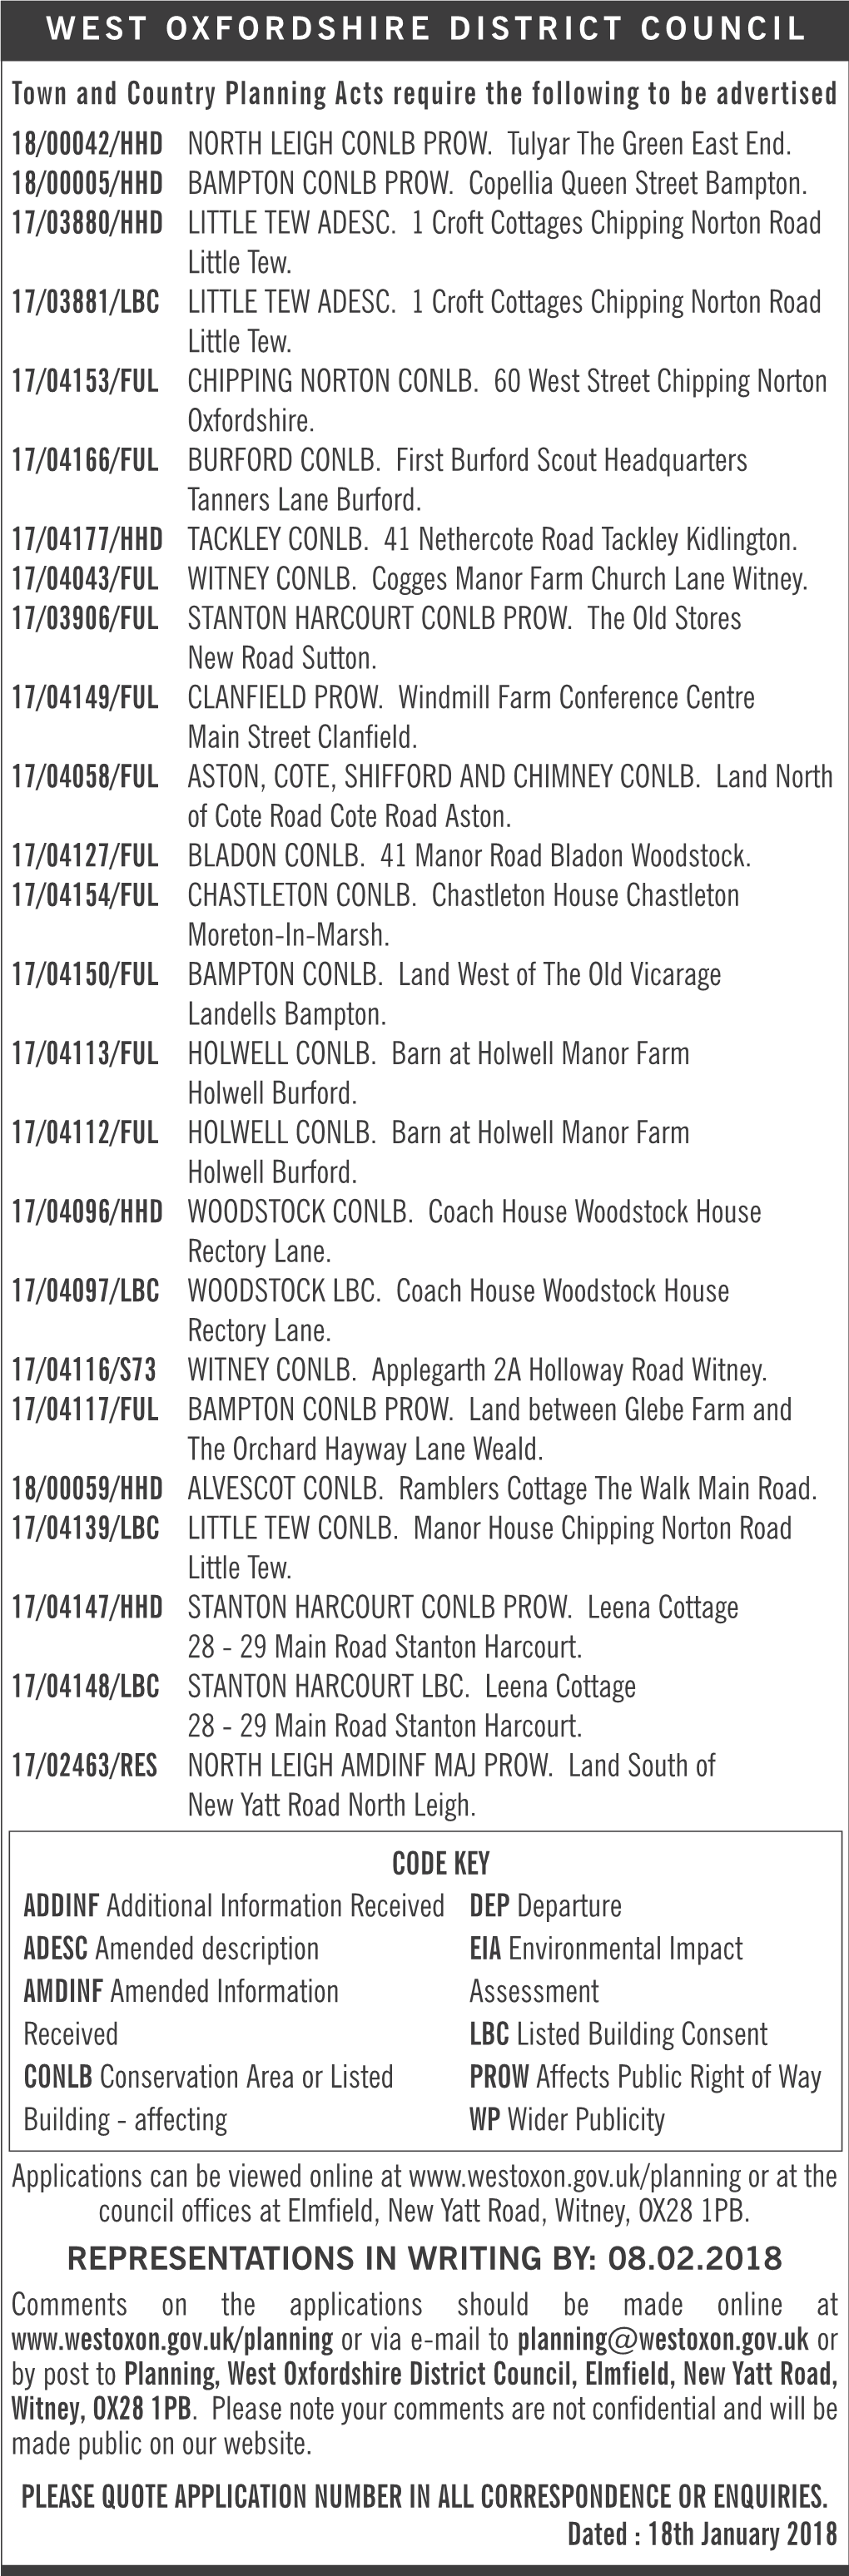 Town and Country Planning Acts Require the Following to Be Advertised 18/00042/HHD NORTH LEIGH CONLB PROW